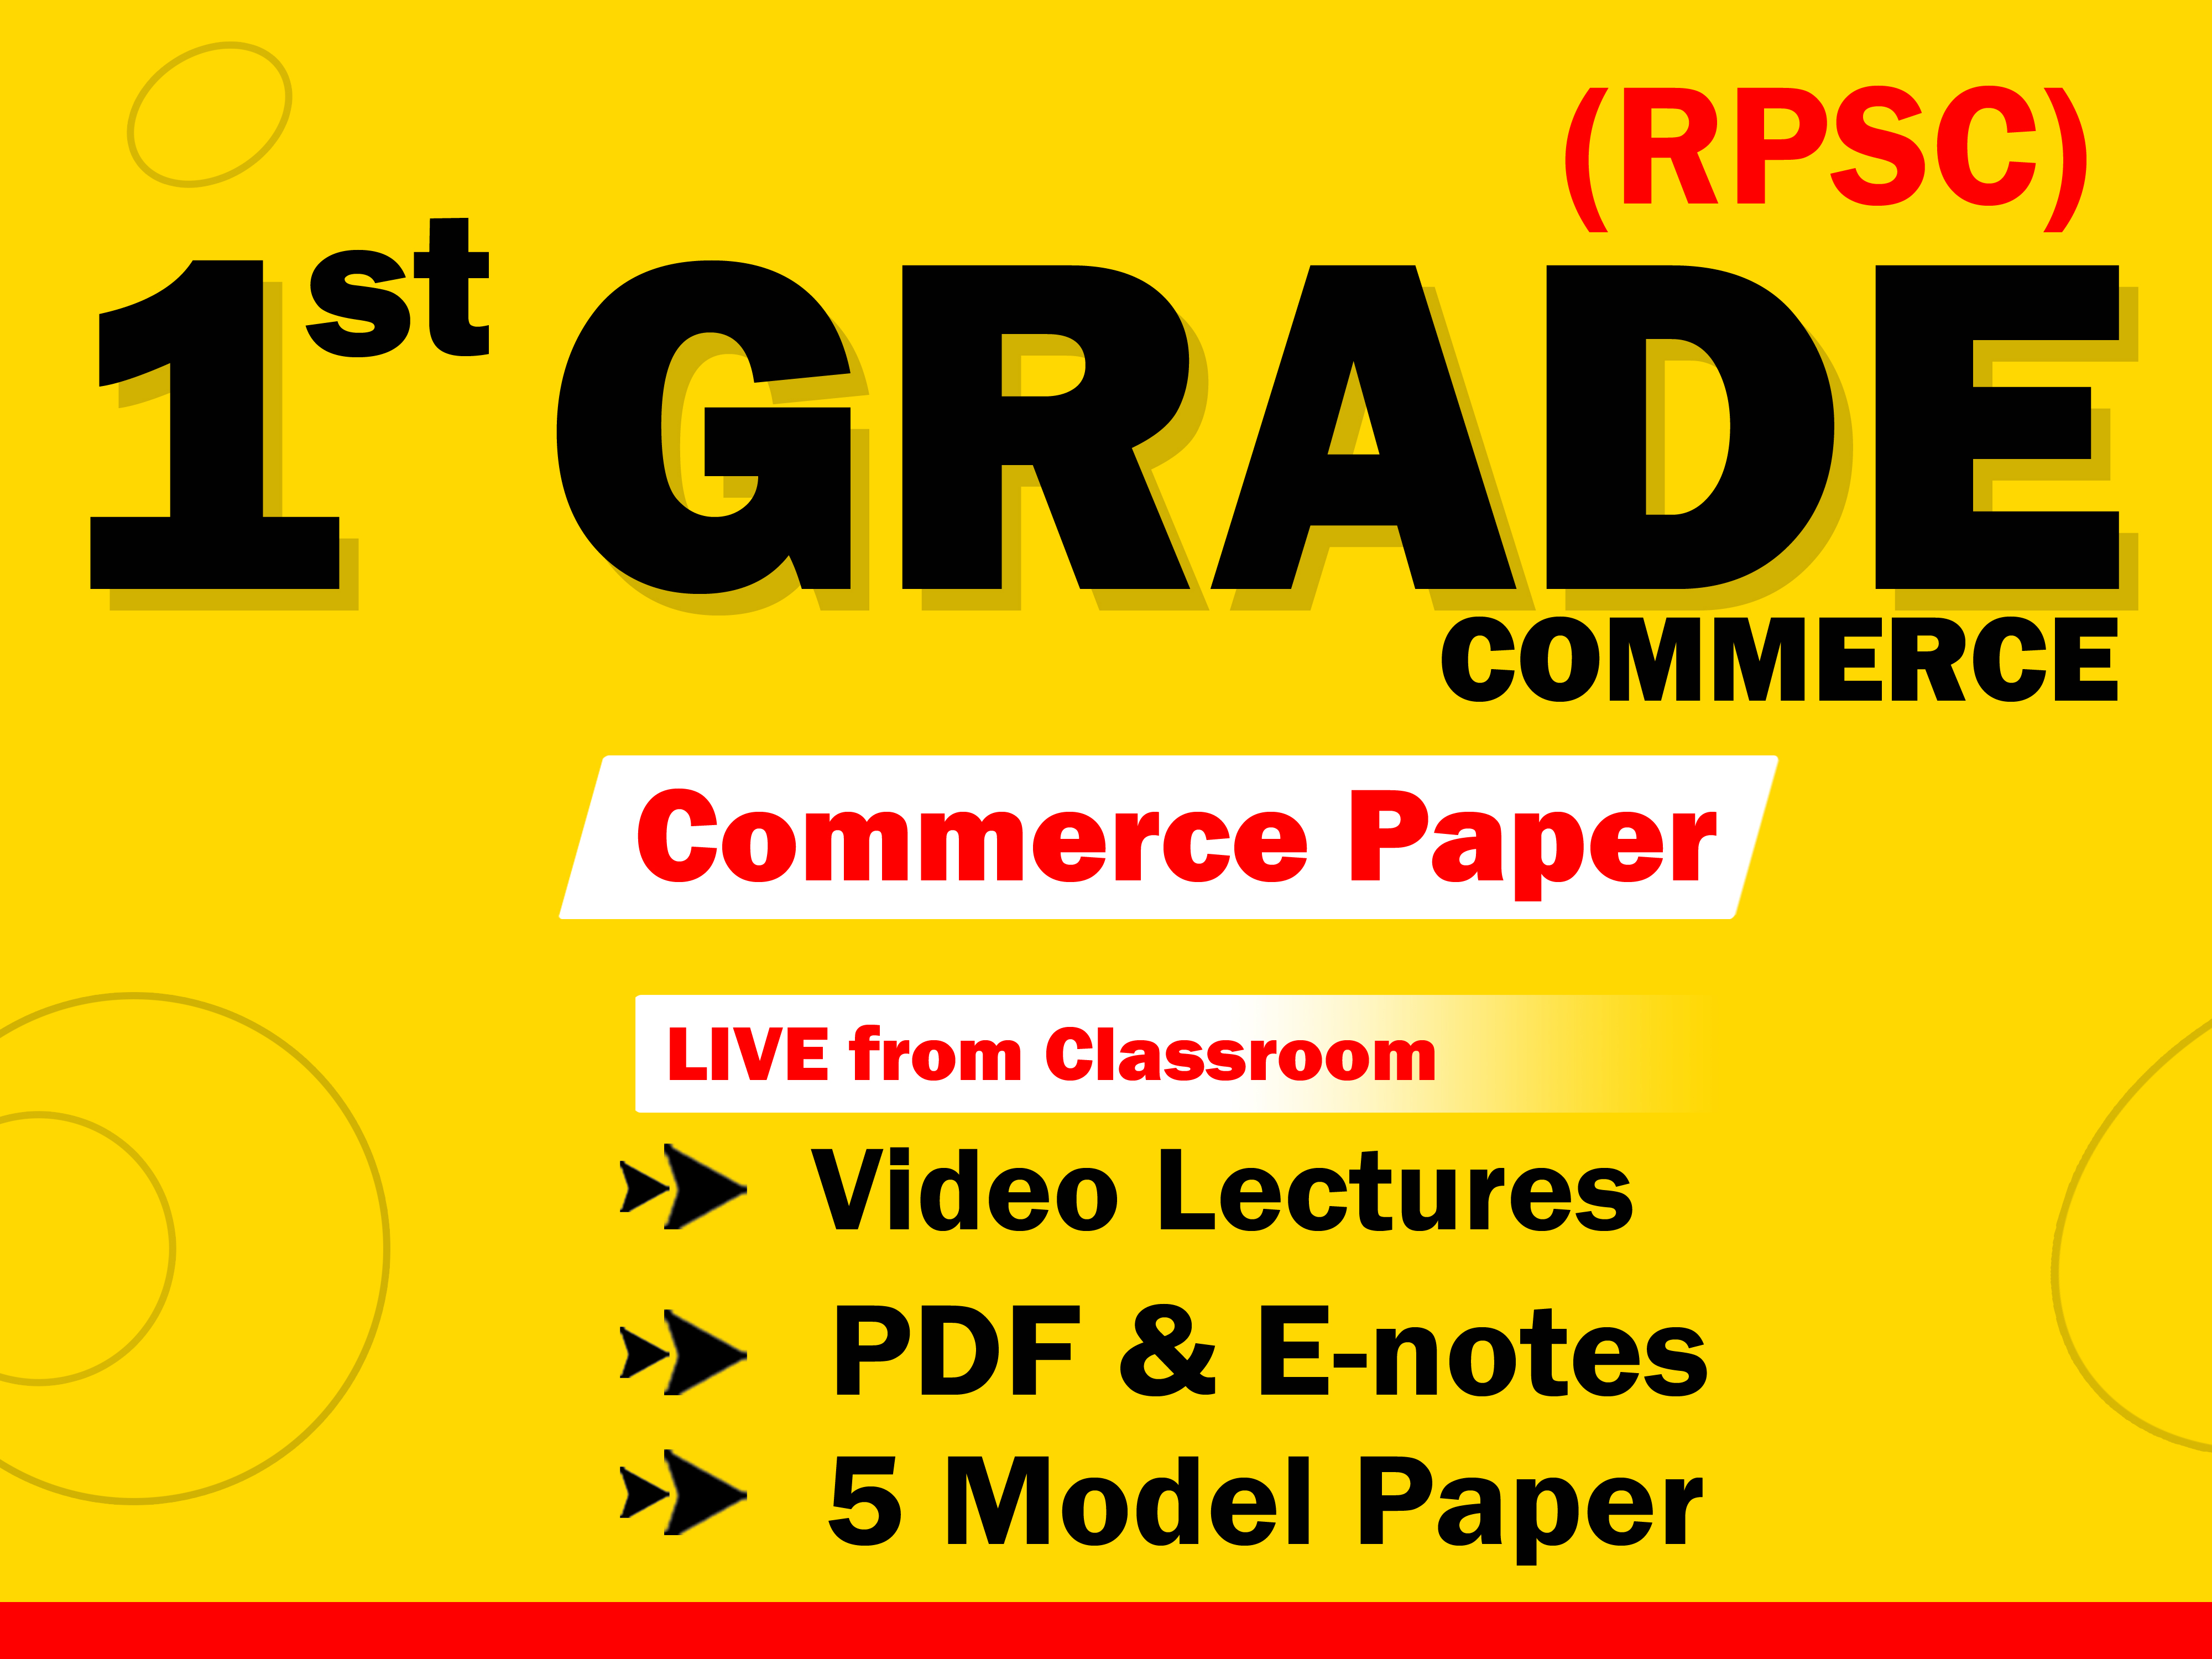 Ready go to ... http://on-app.in/app/oc/210003/gjoqf [ RPSC First Grade - Commerce paper (Except Psychology)]